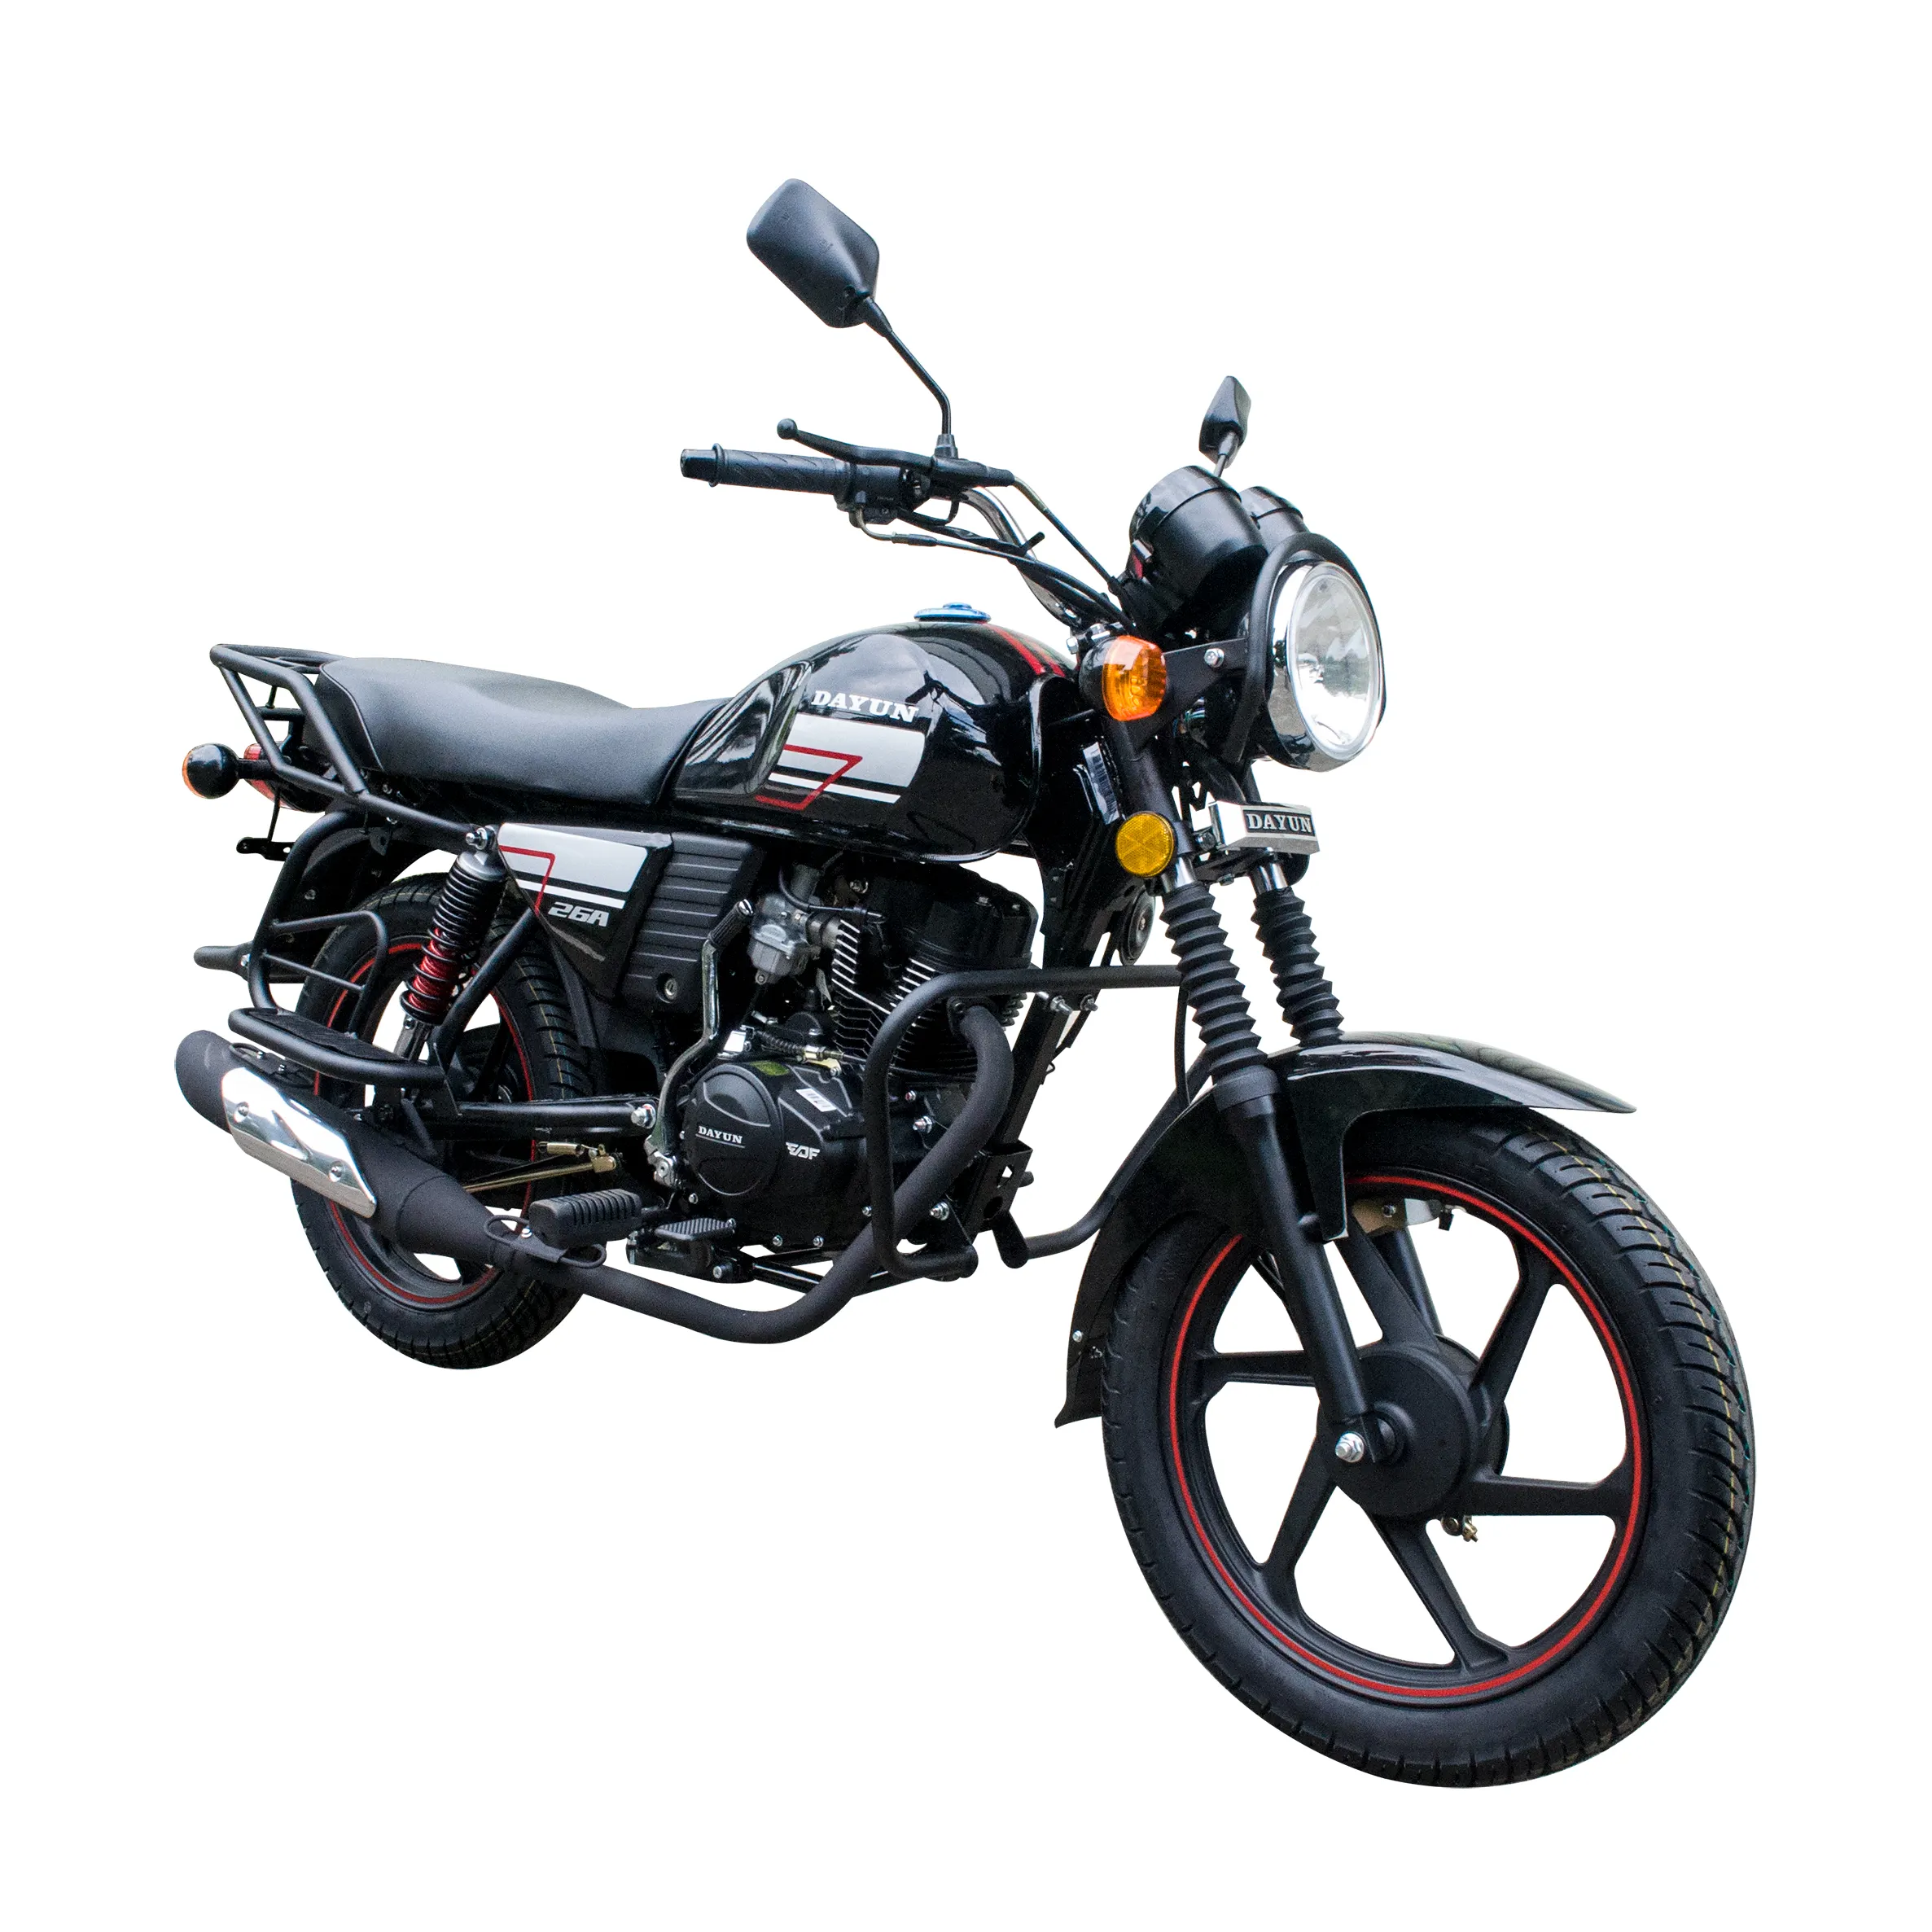 Dayun Motorcycle DY150-26 hot selling high performance gasoline motorcycle